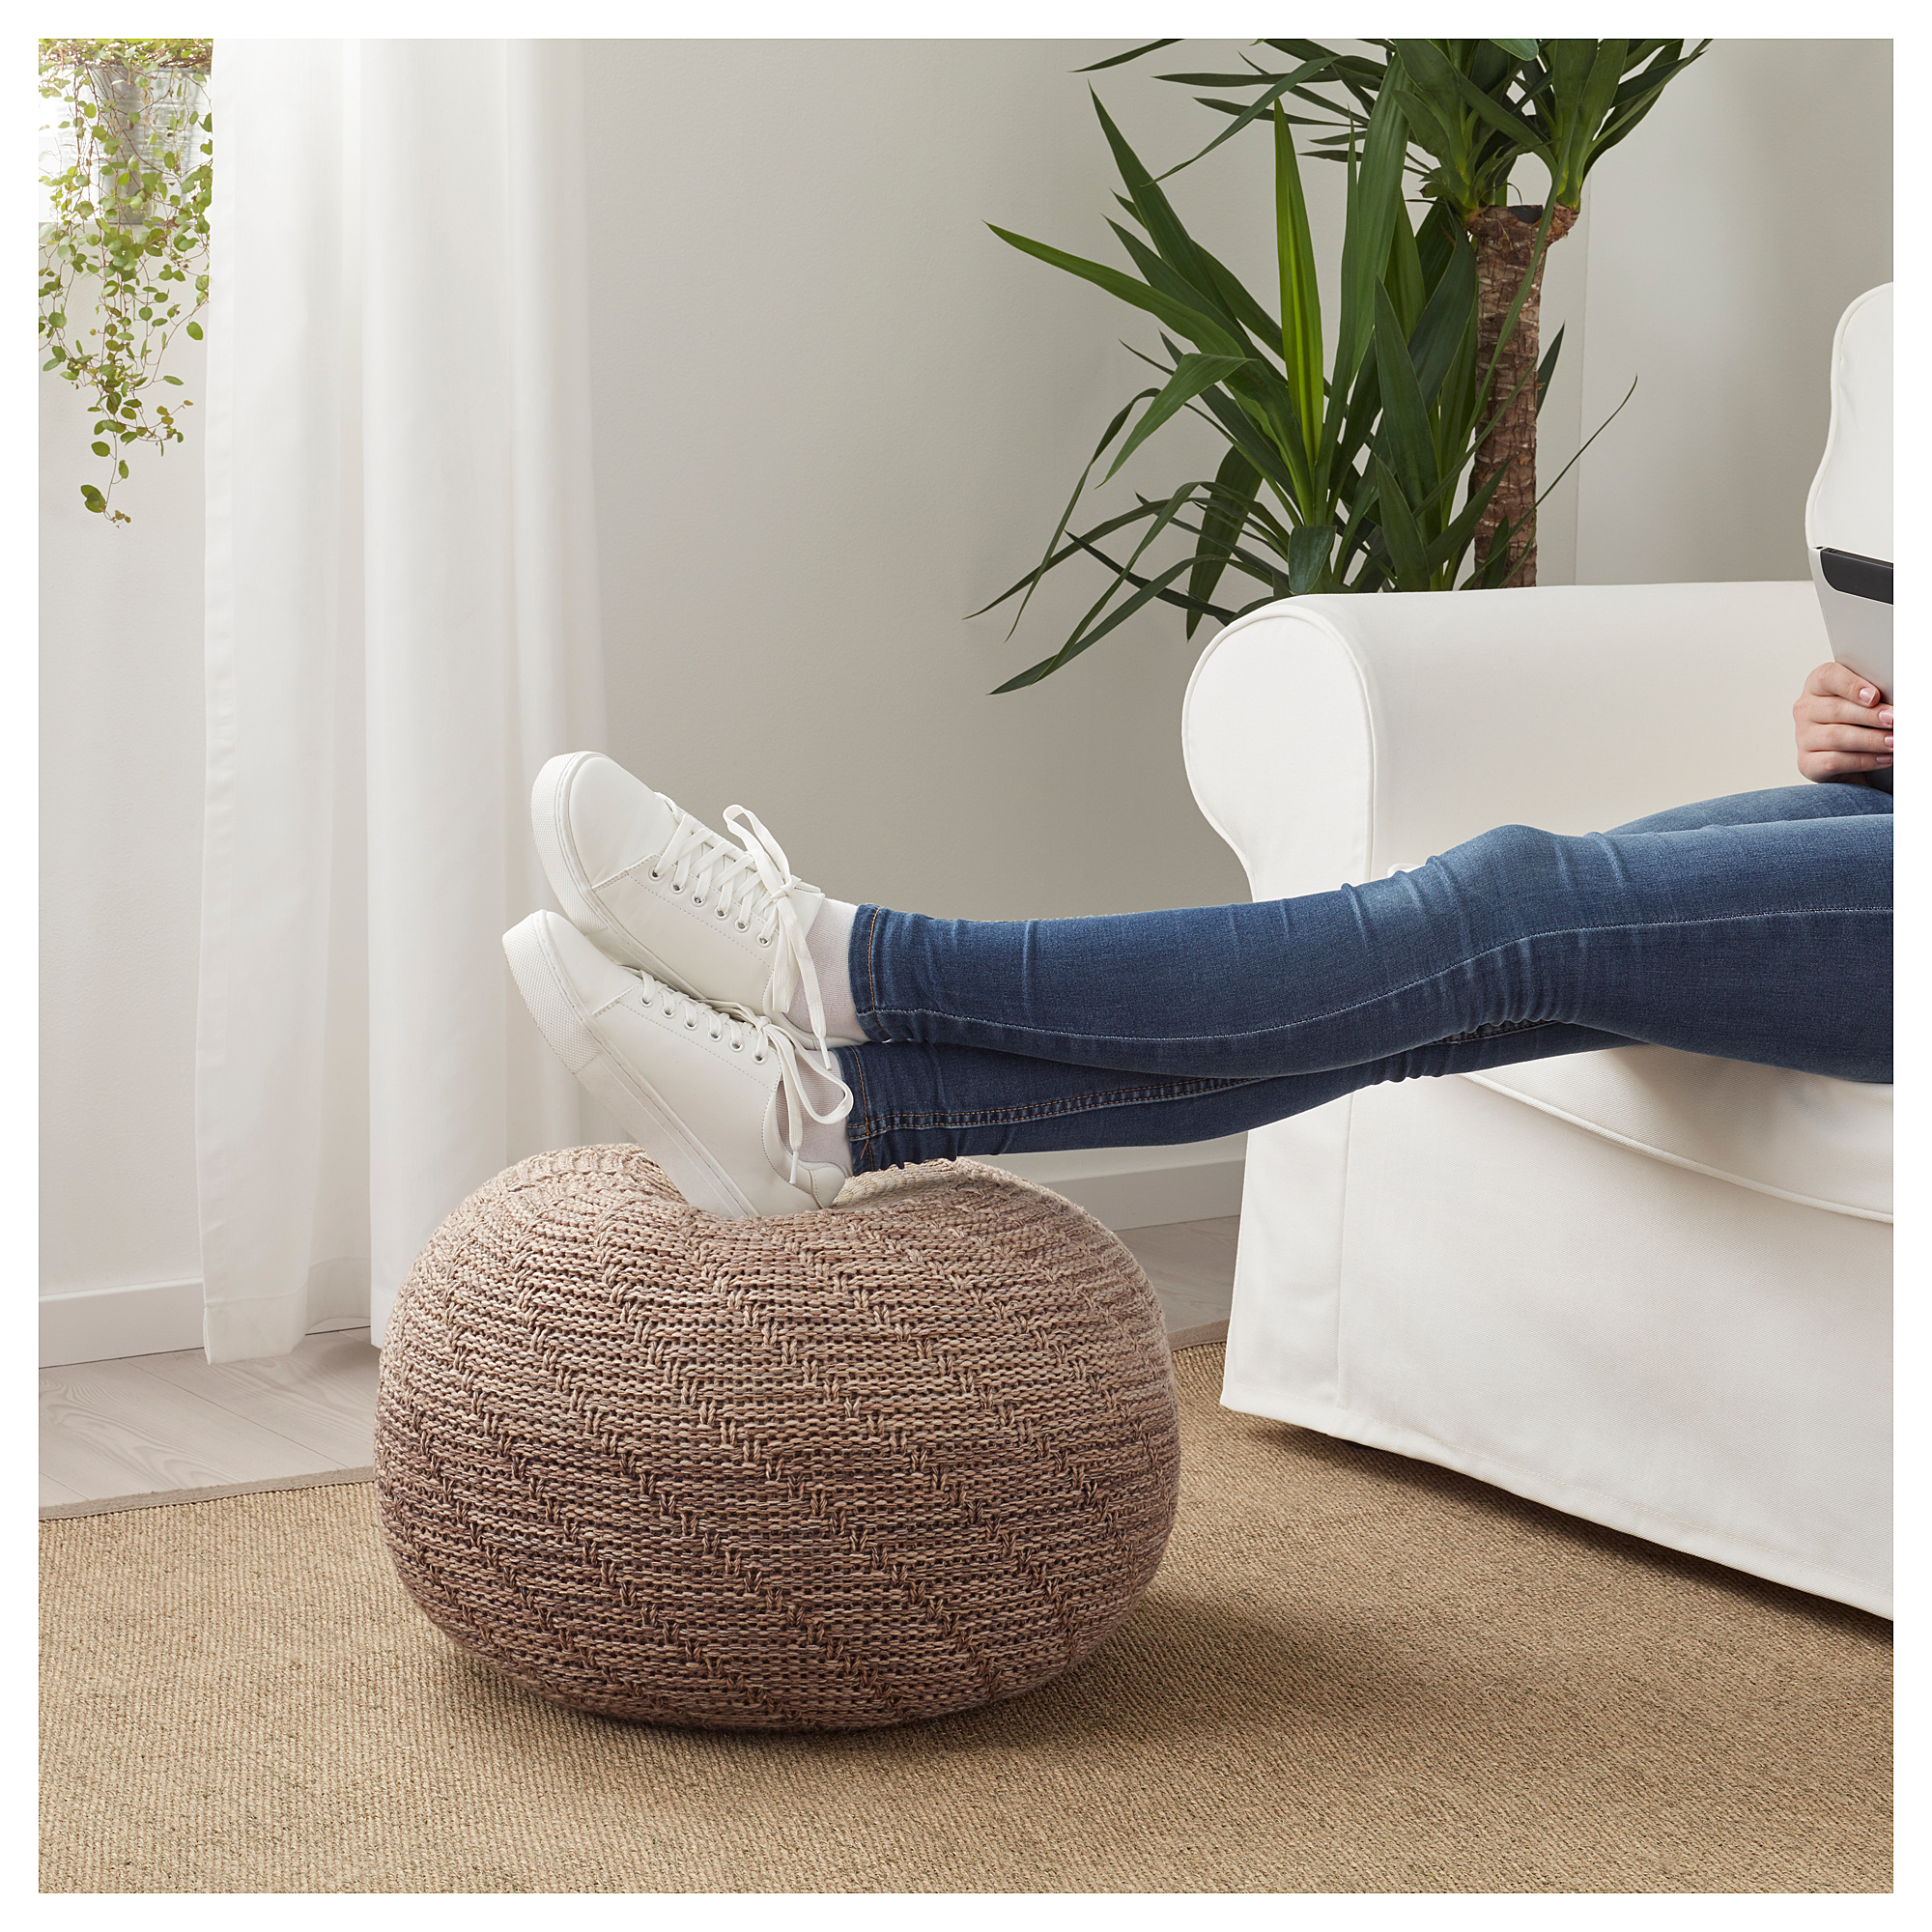 <h2><a href="https://www.ikea.com/ca/fr/catalog/products/20385313/" target="_blank" rel="noopener">Pouf</a></h2>
<p>SANDARED</p>
<p>59,99 $</p>
